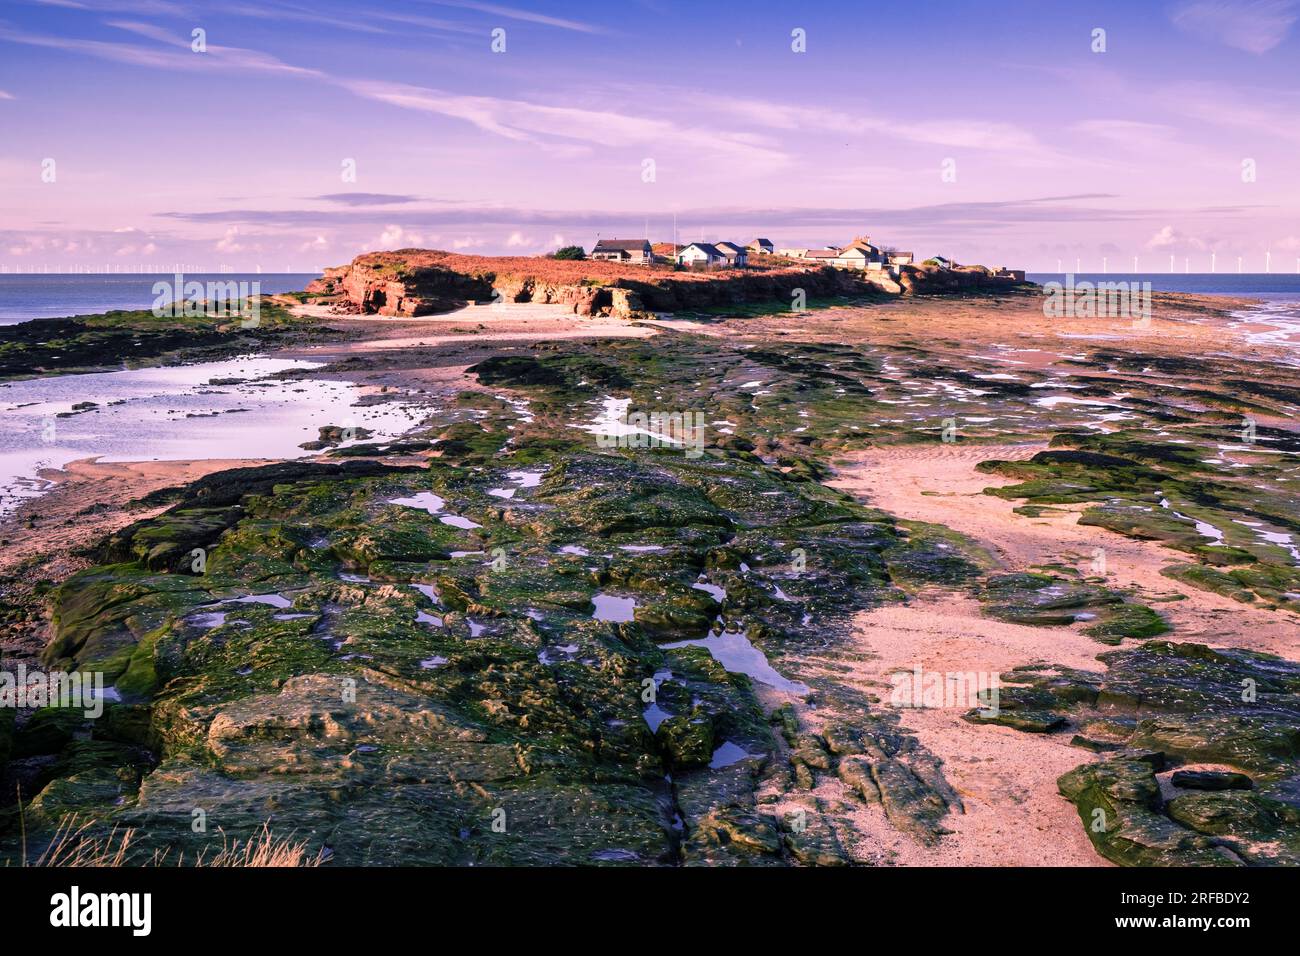 View across rock pools to Hilbre Island from Little Hilbre island in Dee Estuary at low tide. West Kirby, Wirral Peninsula, Merseyside, England, UK Stock Photo